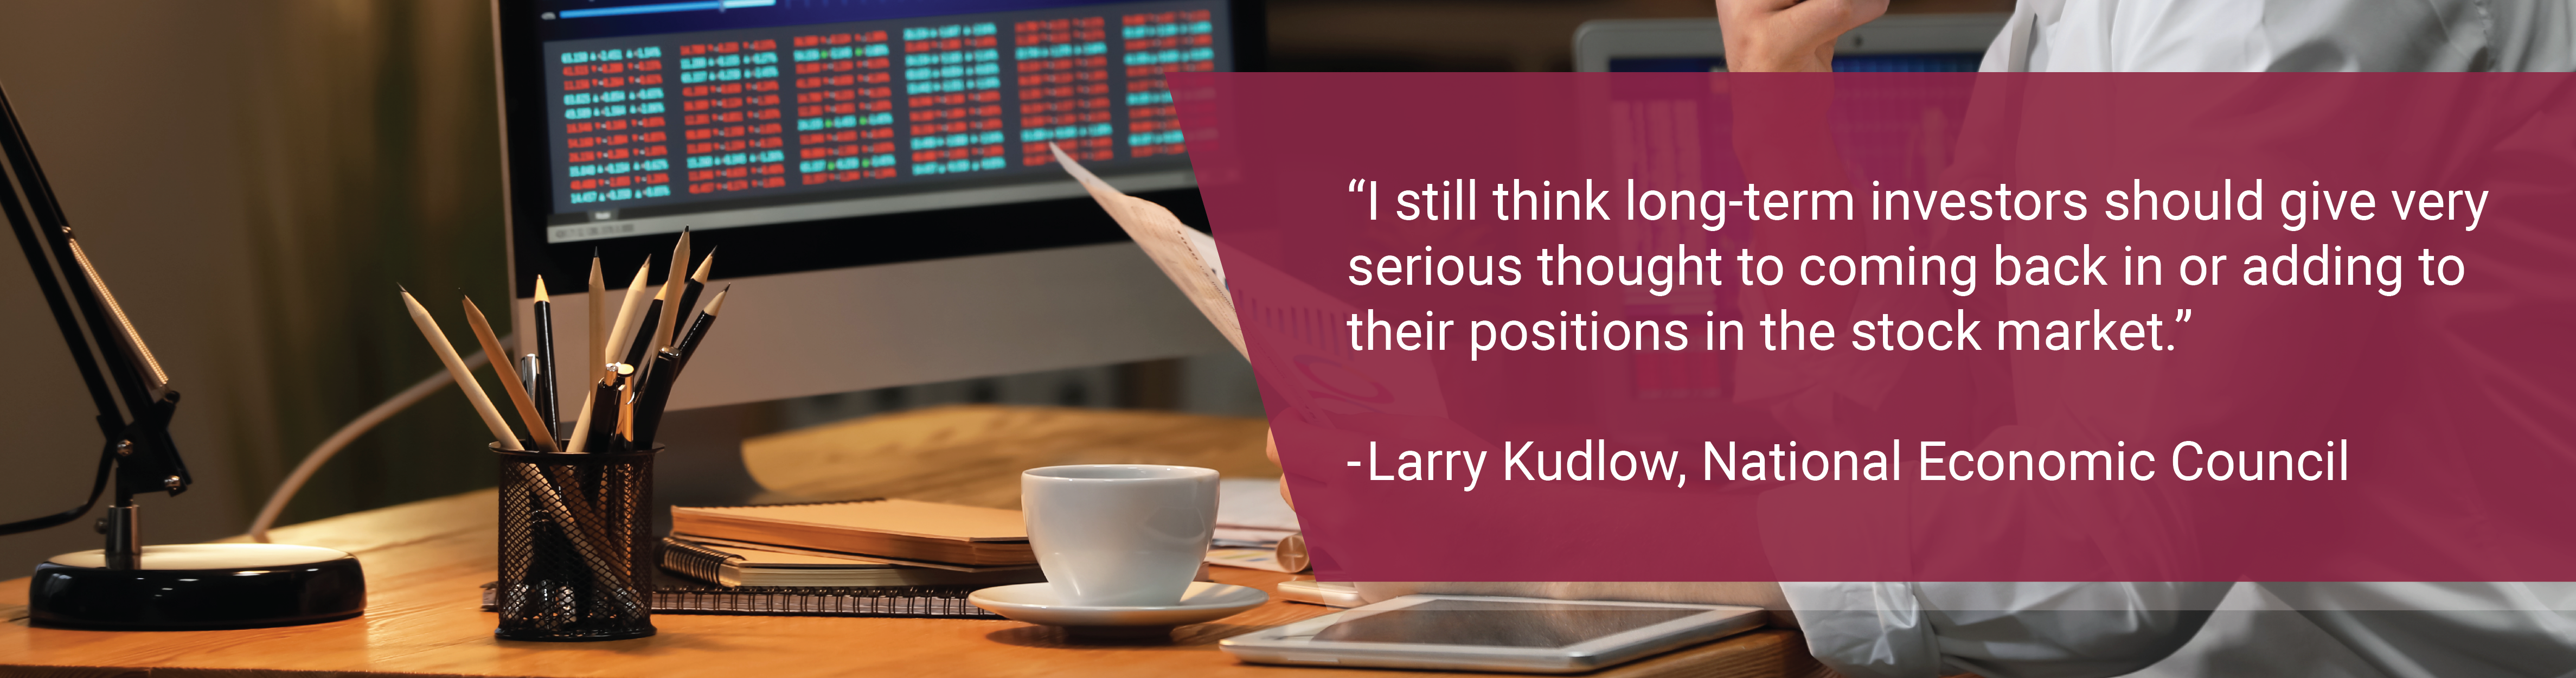 Picture of a desk. Text: "I still think long-term investors should give very serious thought to coming back in or adding to their positions in the stock market." - Larry Kudlow, National Economic Council